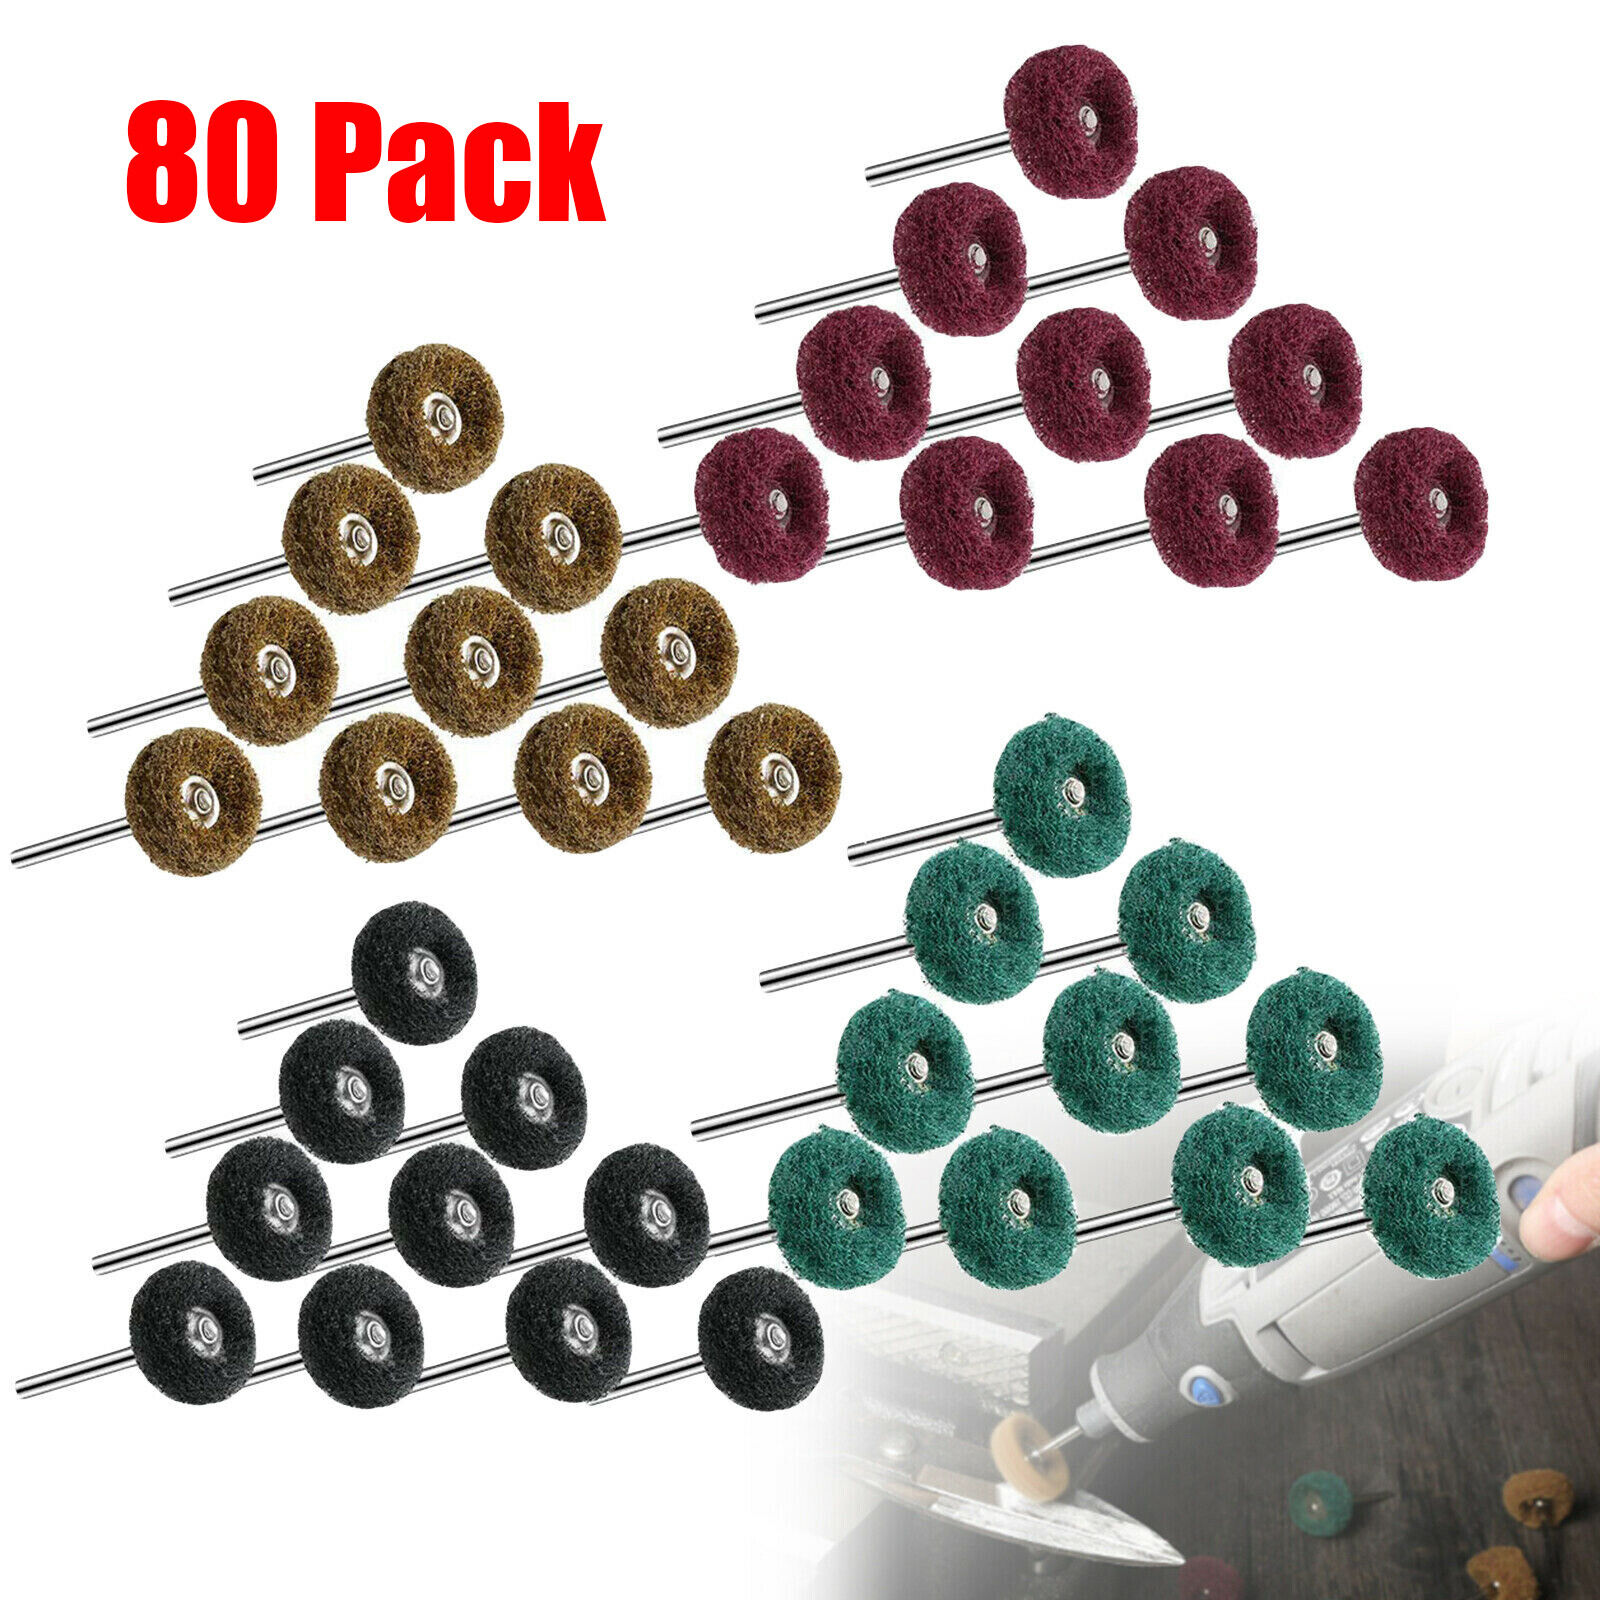 80 Metal Polishing Buffing Wheel Burr Kit Rotary Tool Accessories Set for Dremel Unbranded Does Not Apply